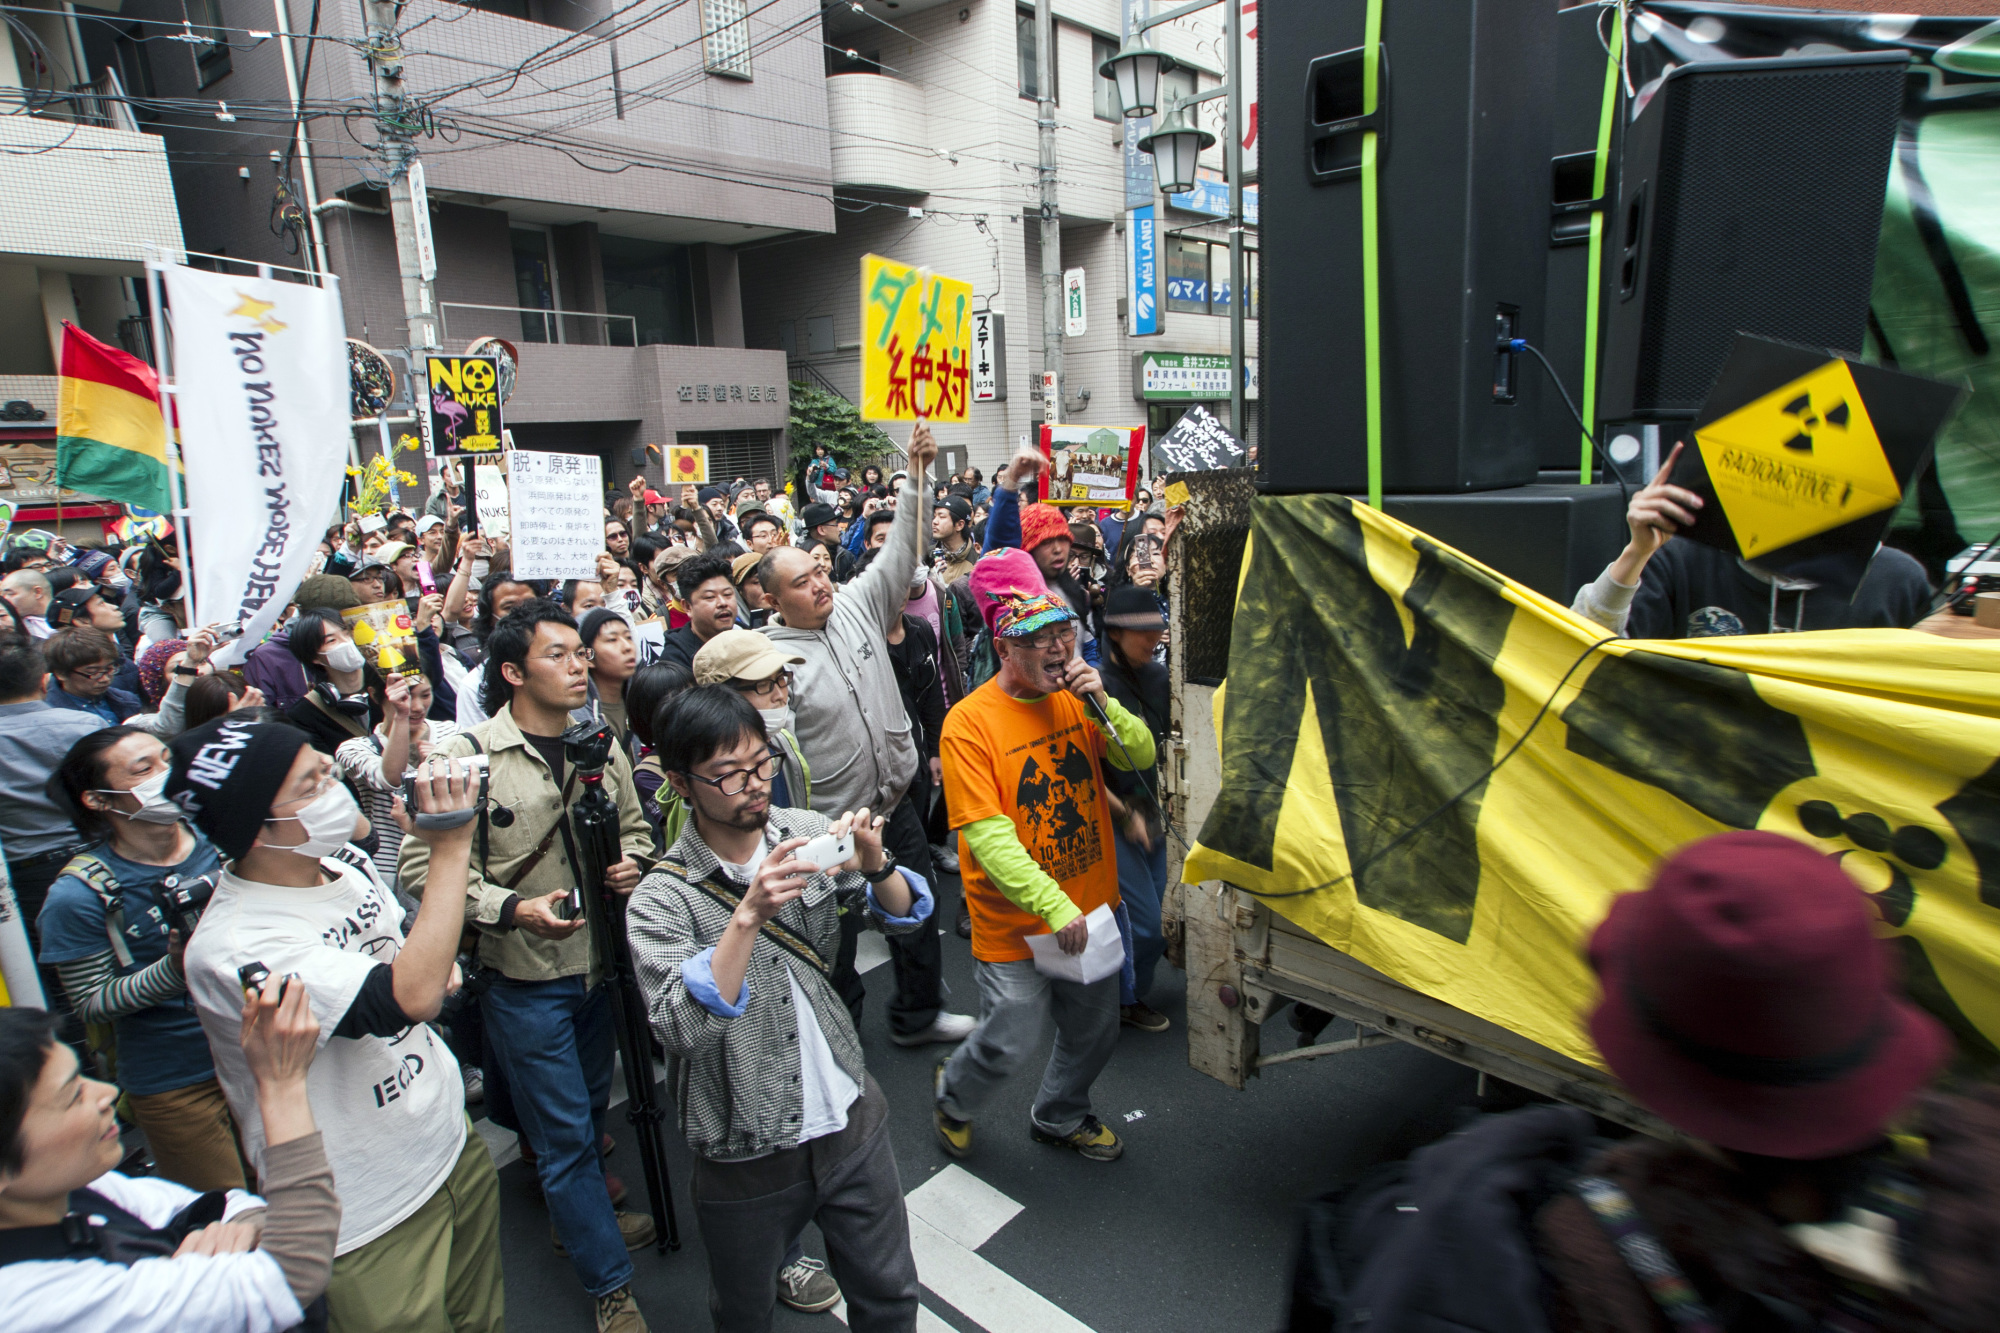 People power: Rankin' Taxi leads one of the first antinuclear demonstrations in Tokyo's Koenji neighborhood in 2011. | JAMES HADFIELD